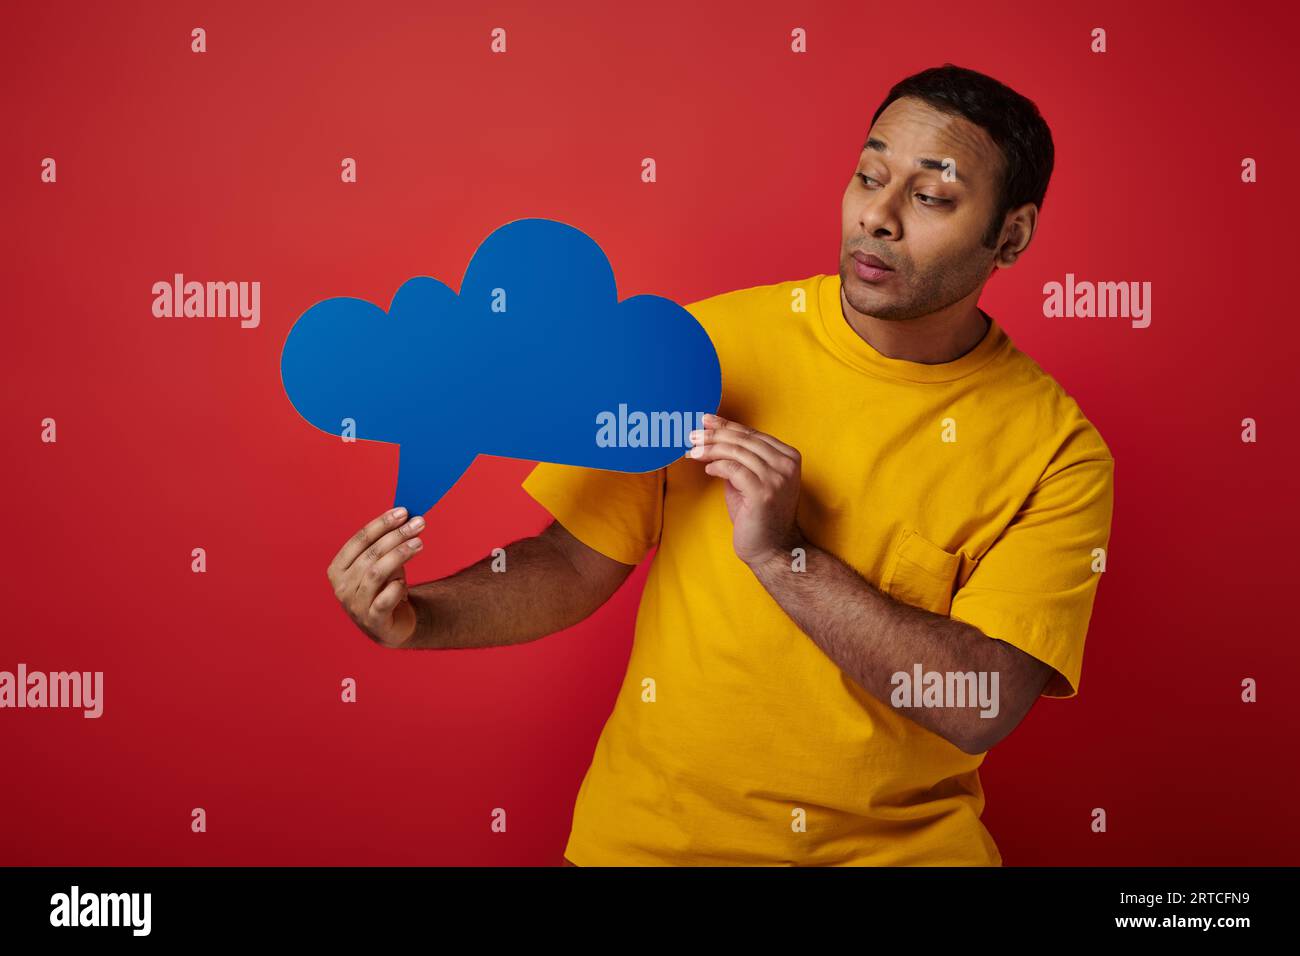 indian man in yellow t-shirt looking at blank thought bubble on red backdrop, upset face Stock Photo